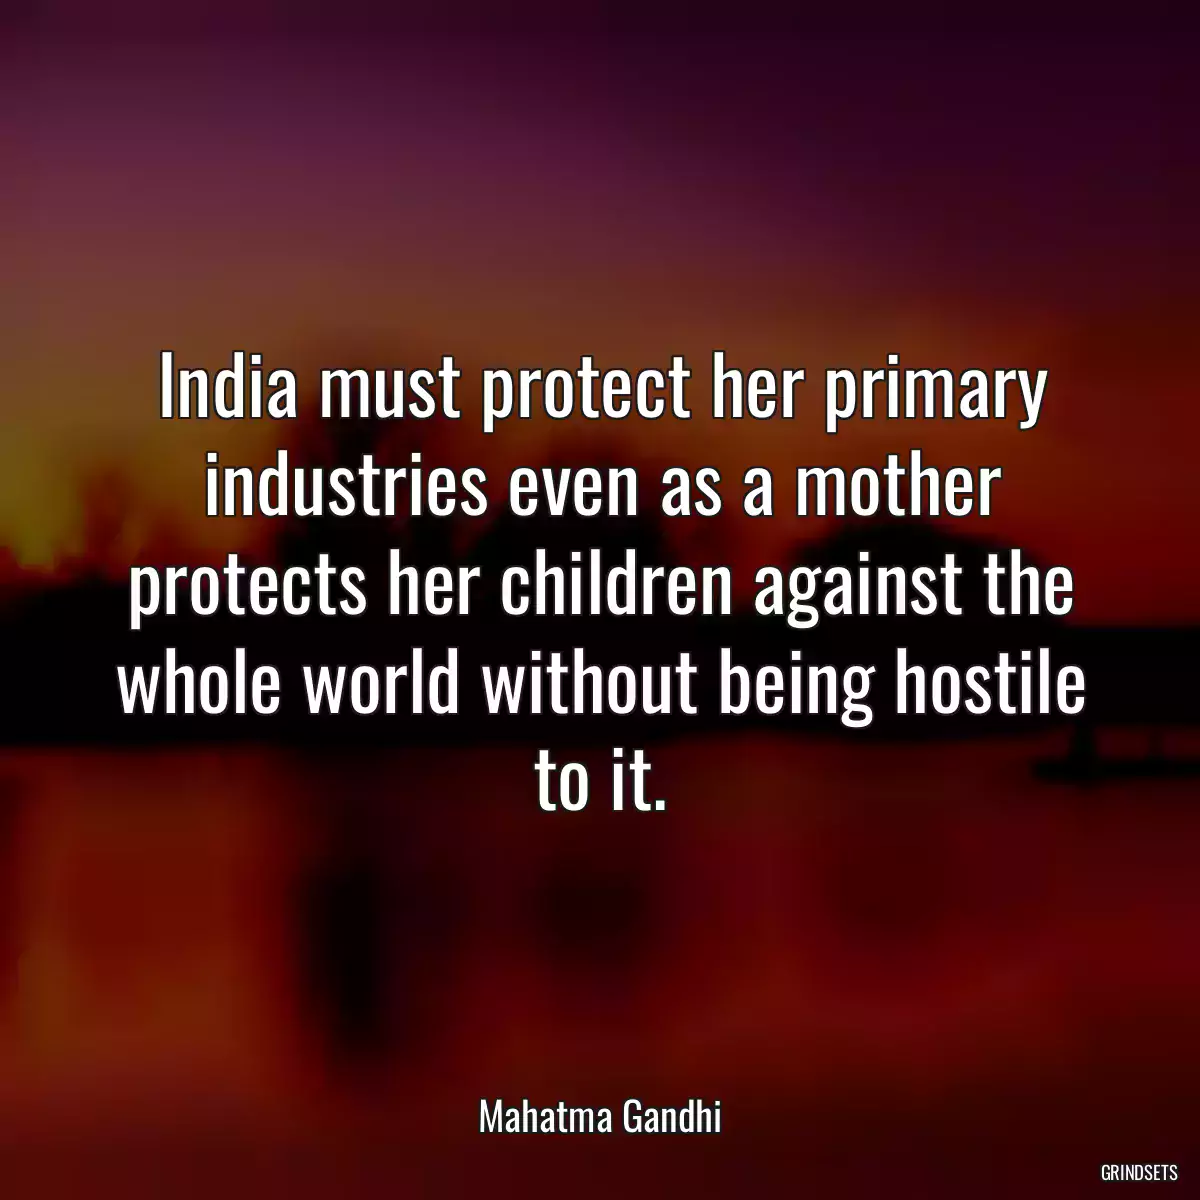 India must protect her primary industries even as a mother protects her children against the whole world without being hostile to it.